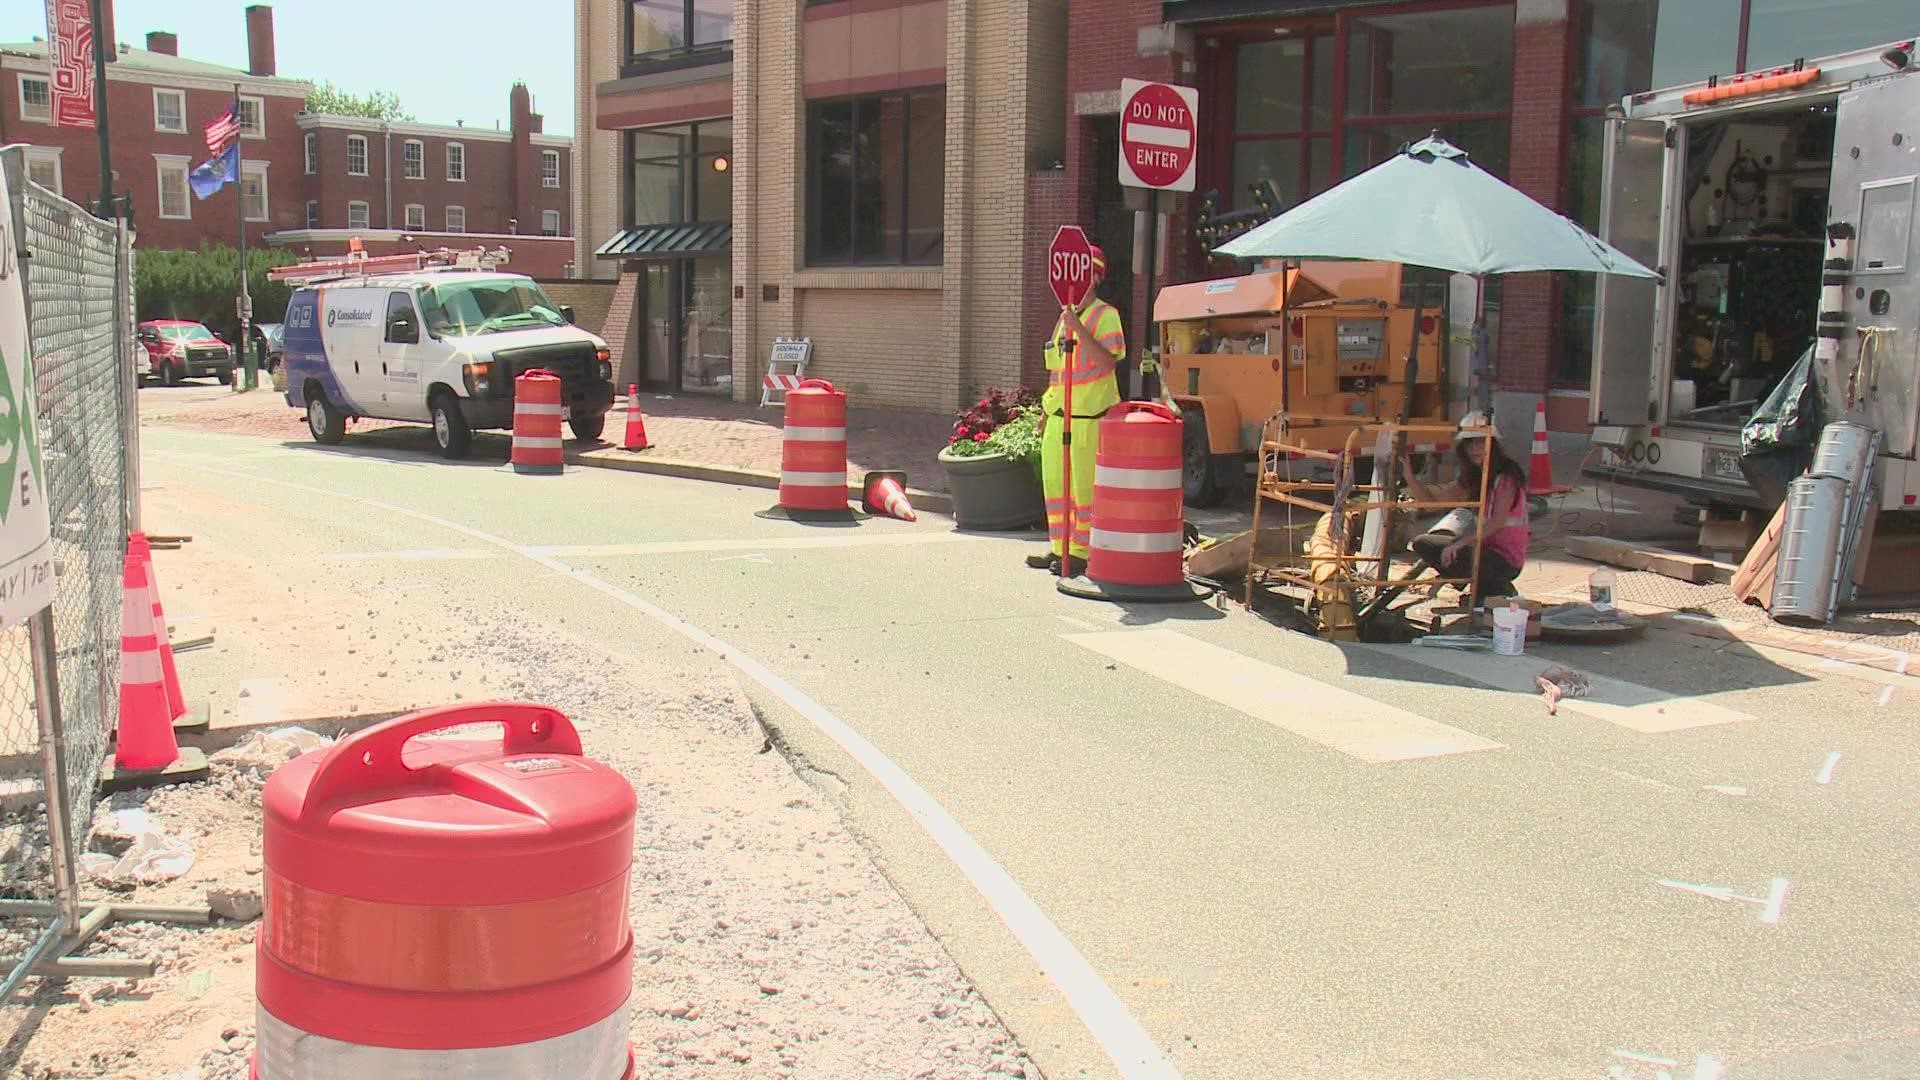 Portland Public Works said it can't provide a date for Free Street's reopening as Consolidated Communications completes its repairs, closing off High Street.